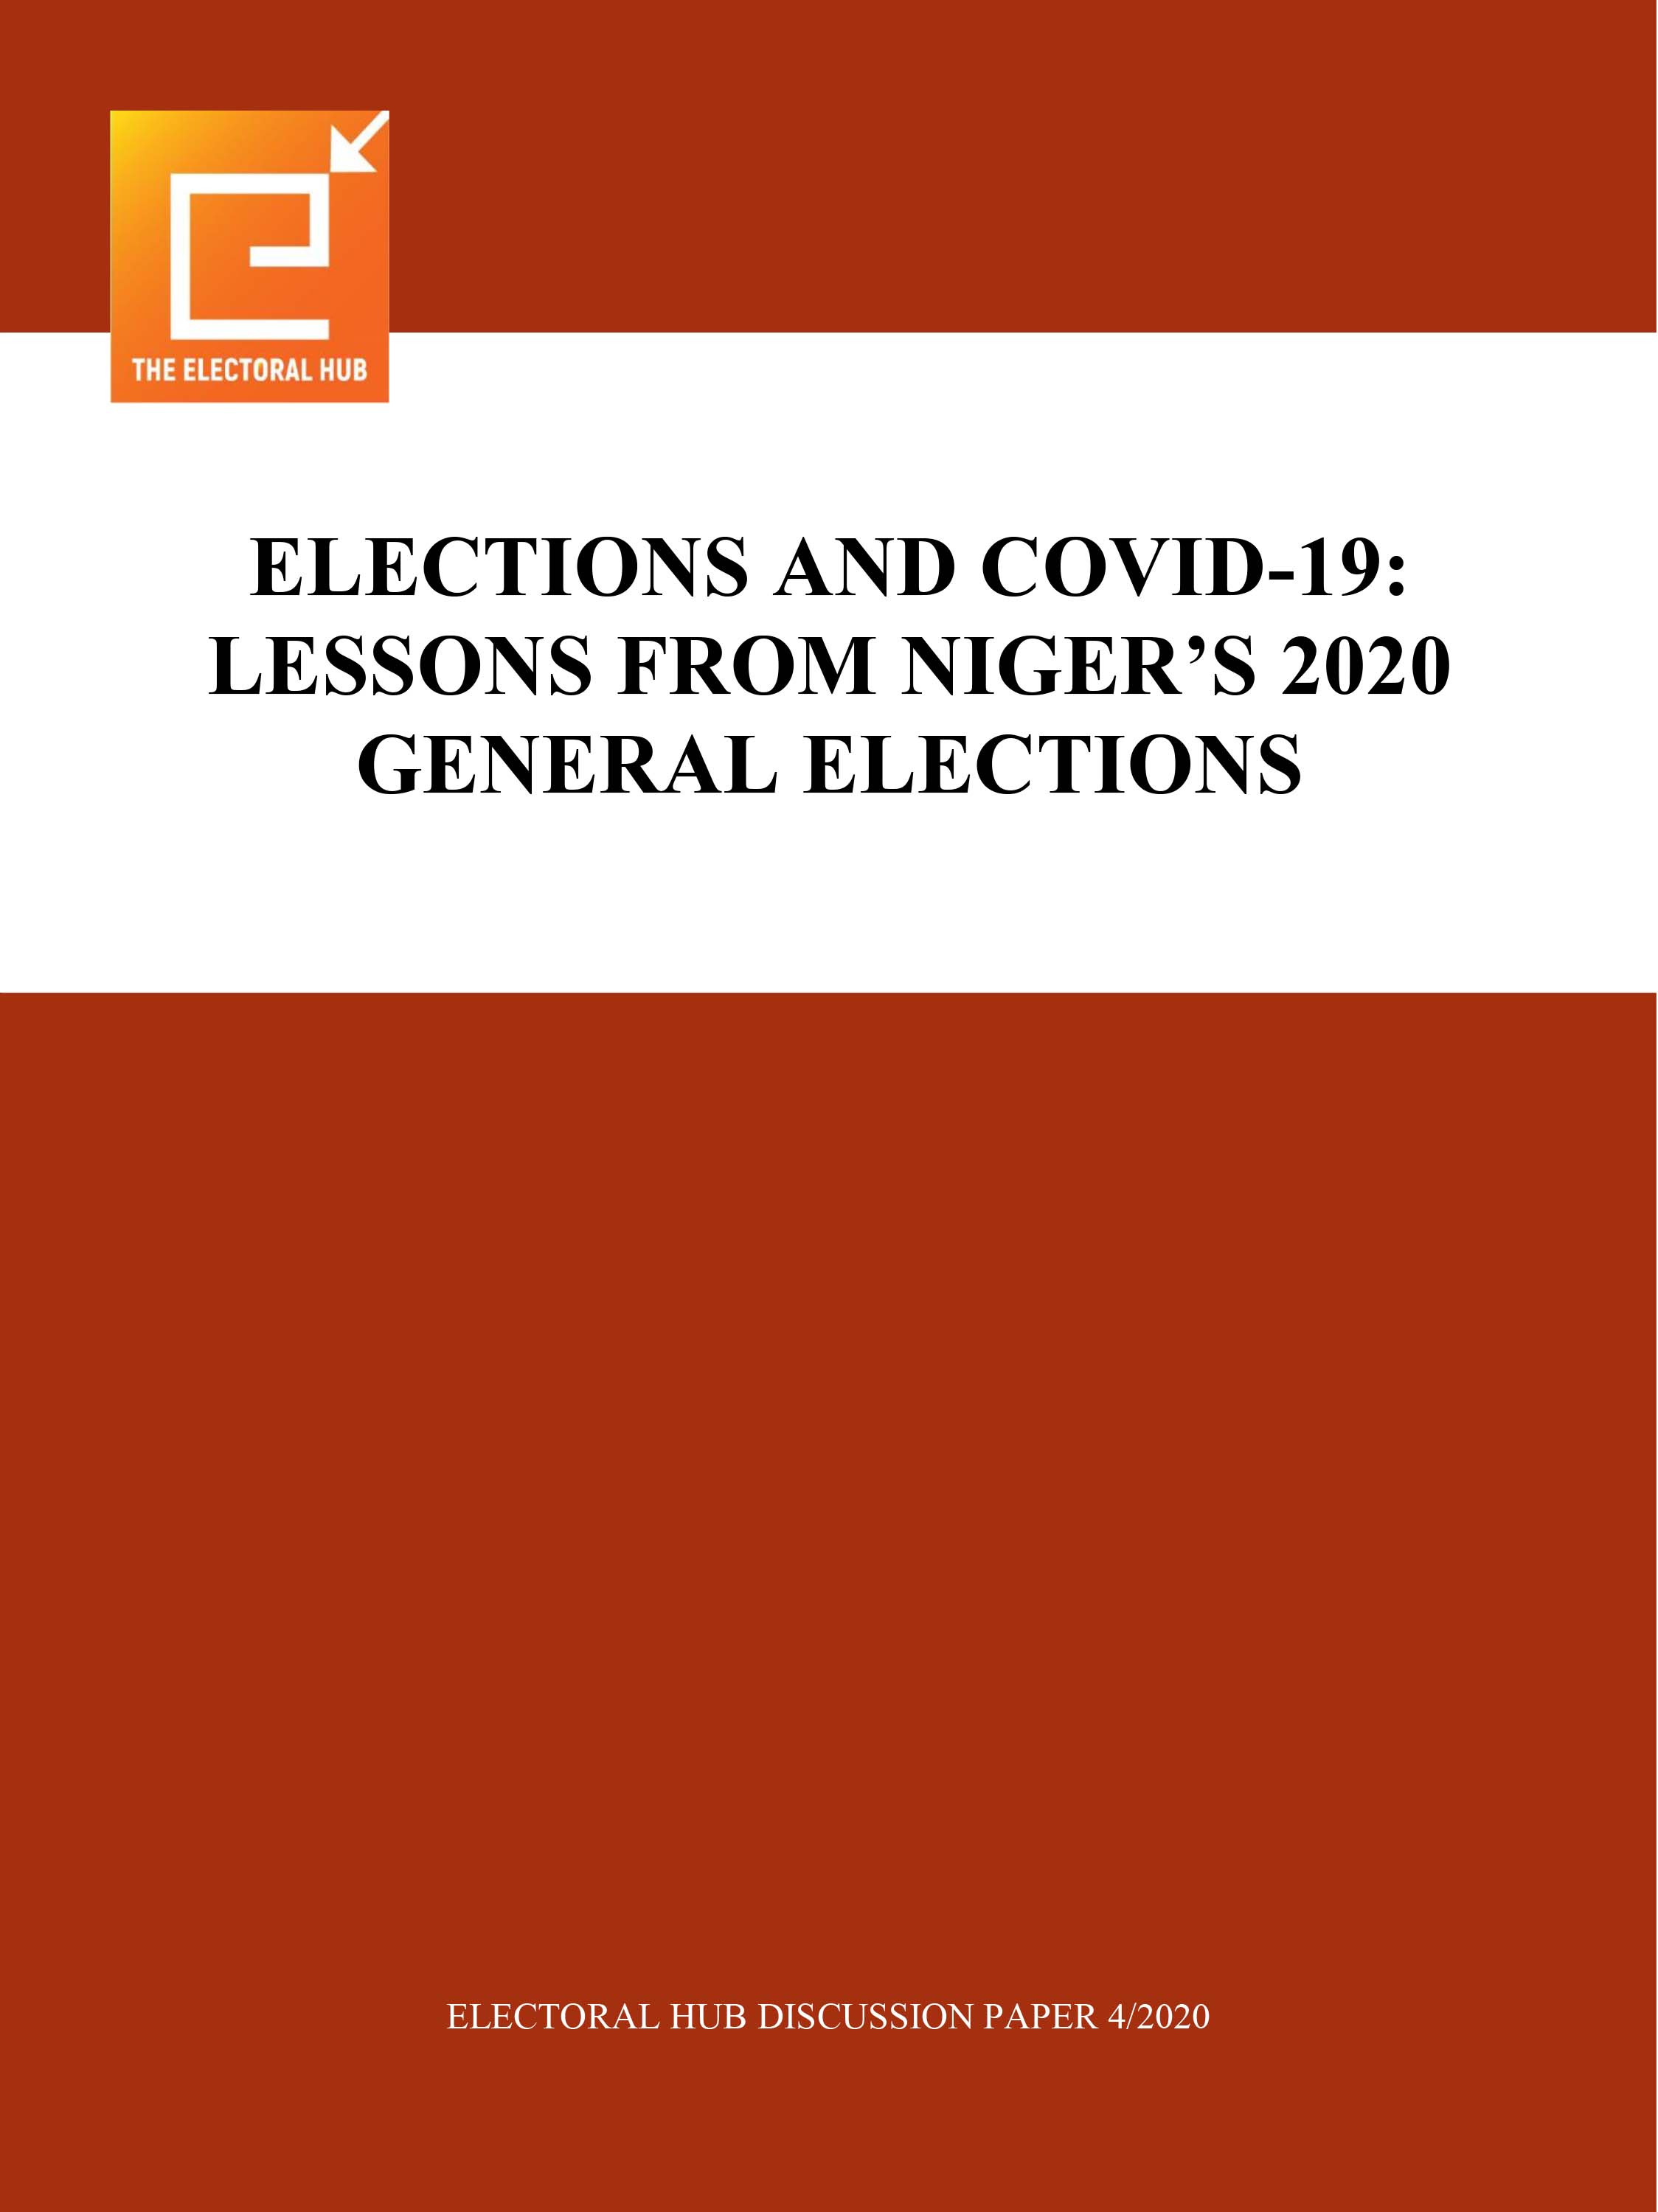 Elections and Covid-19: Lessons from Niger’s 2020 General Elections